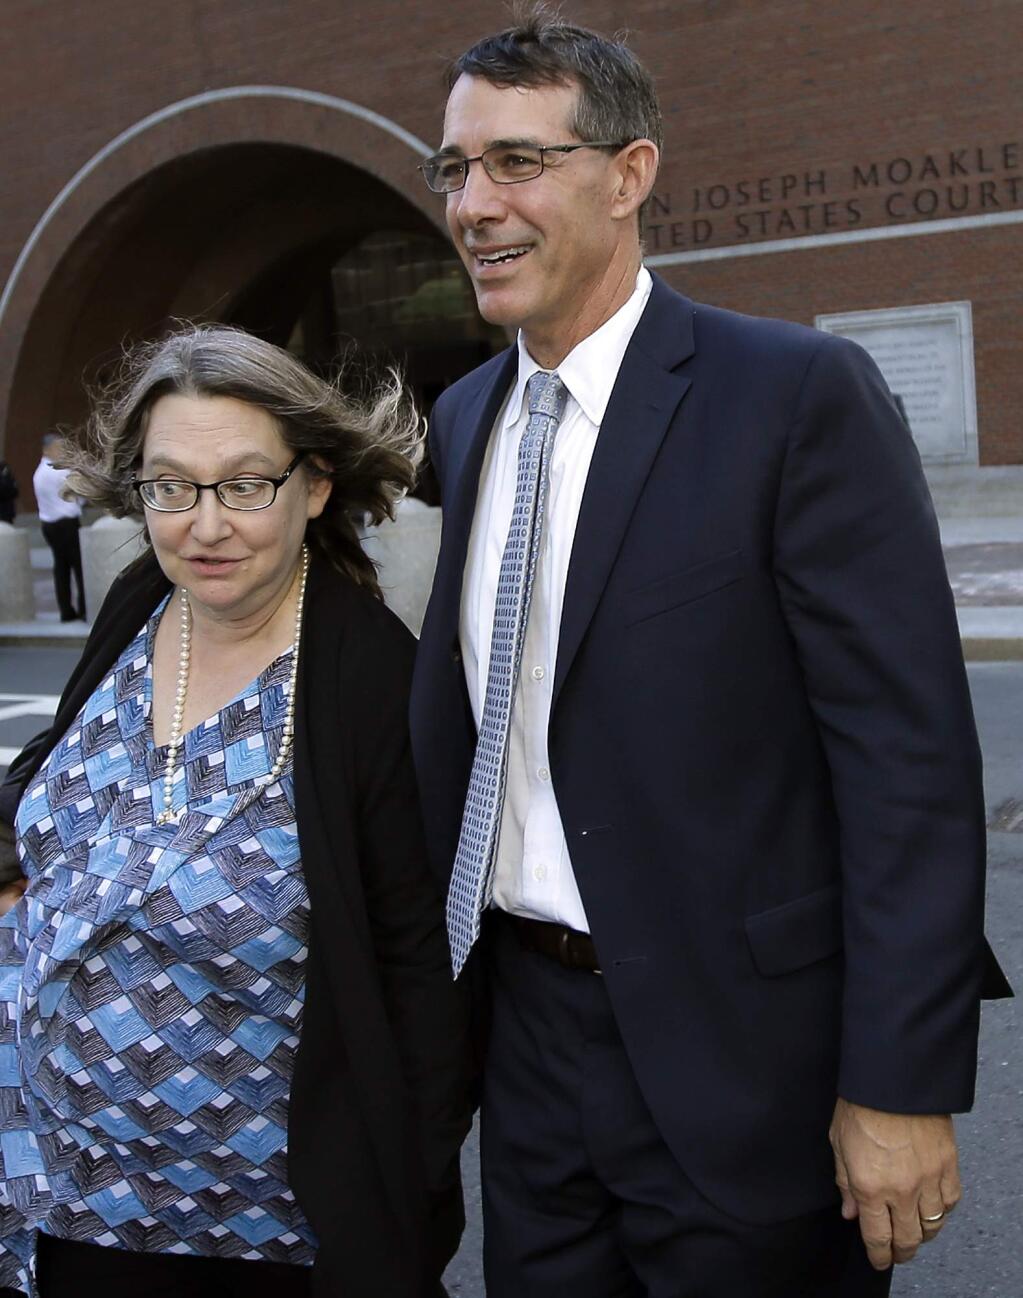 Michael Center, right, former men's tennis coach at the University of Texas at Austin, departs federal court with an unidentified woman, Wednesday, April 24, 2019, in Boston, after he pled guilty to charges in a nationwide college admissions bribery scandal. (AP Photo/Steven Senne)